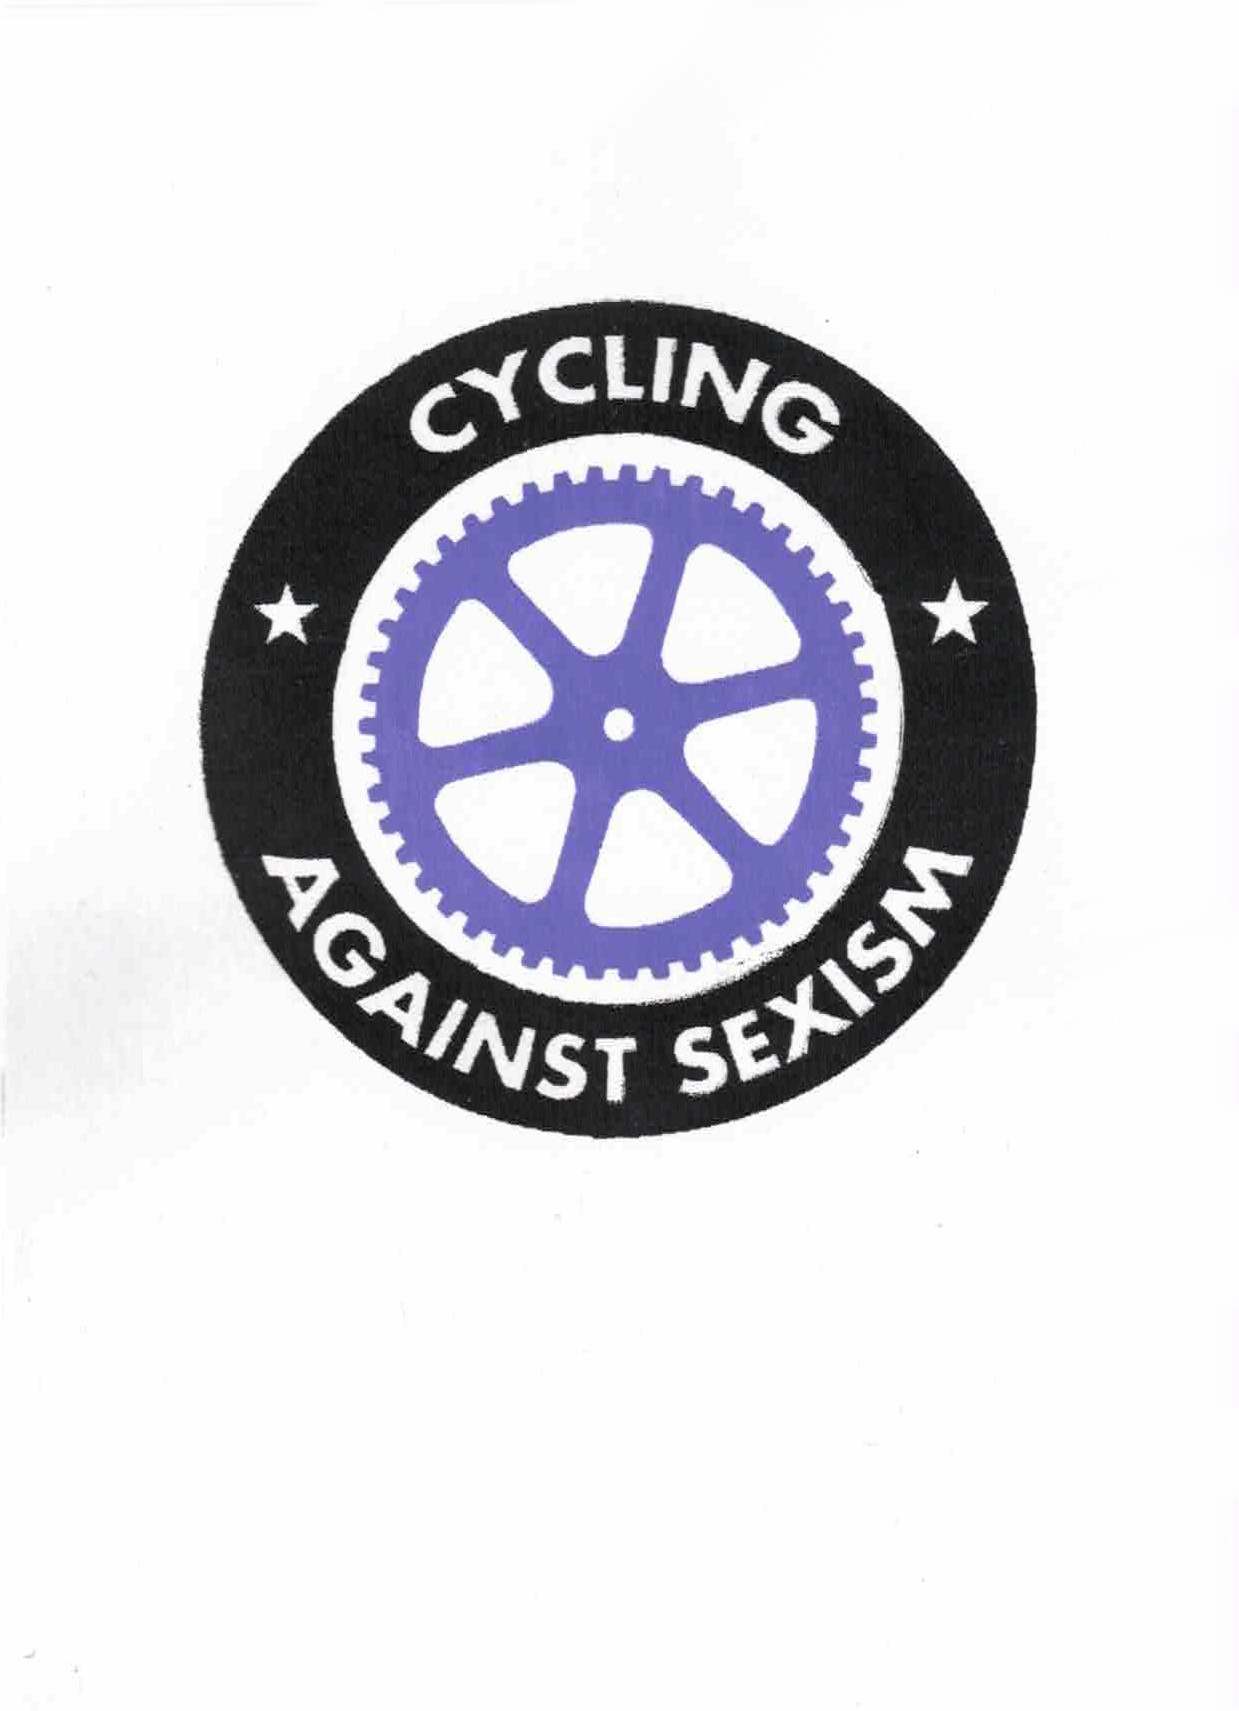 Cycling against sexism